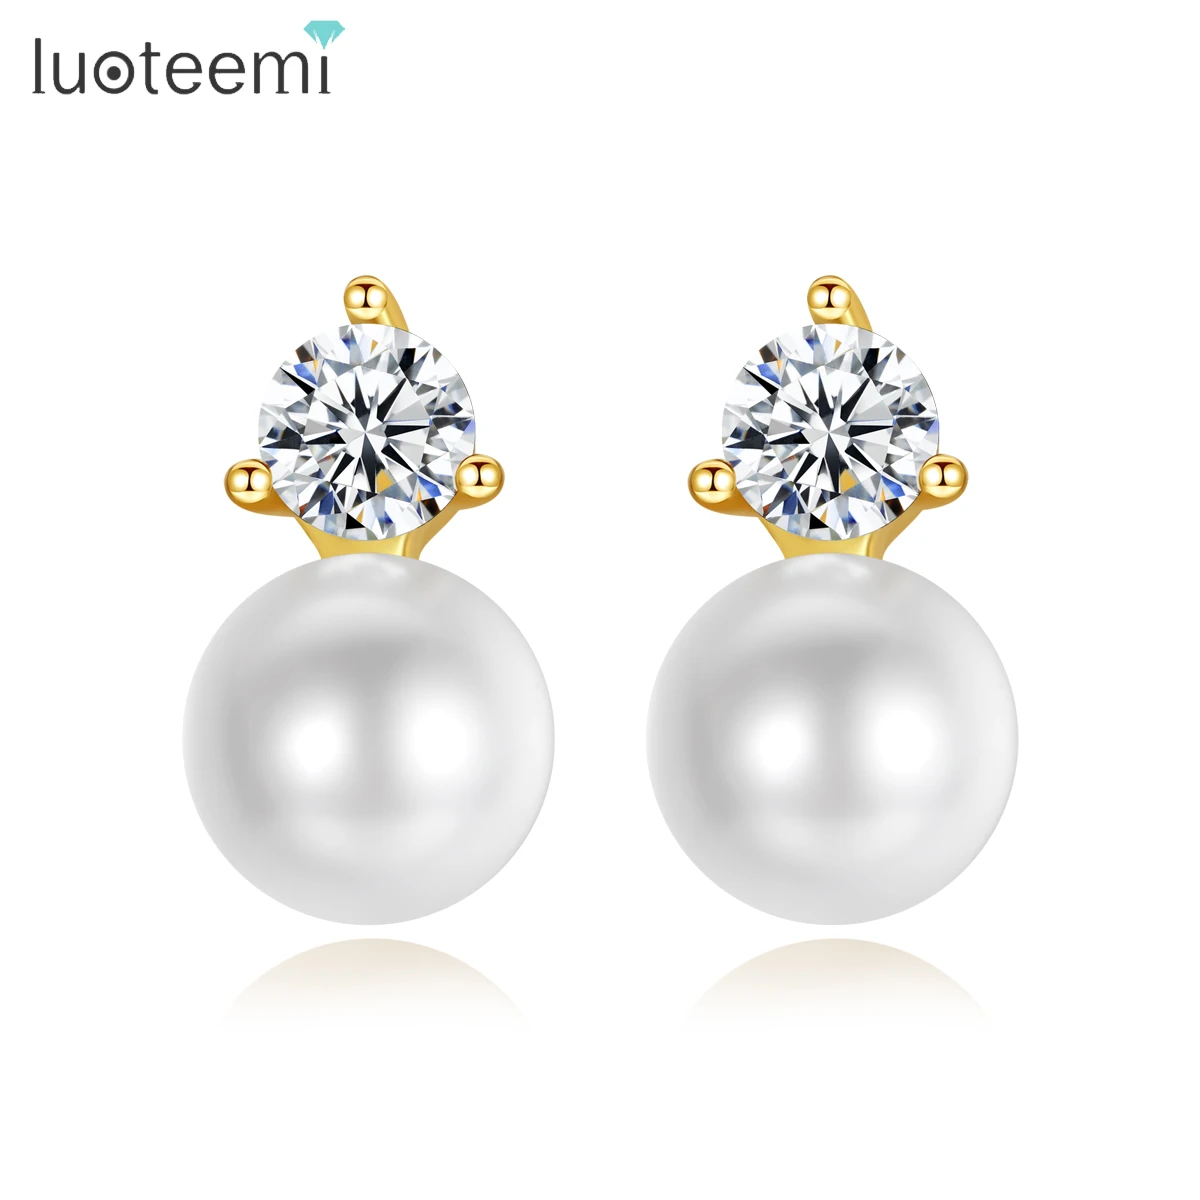 

LUOTEEMI Stud Earrings Cubic Zircon Imitation Pearls Cute Fashion Jewelry for Women Girls Dating Party Boucle D’Oreille Gifts